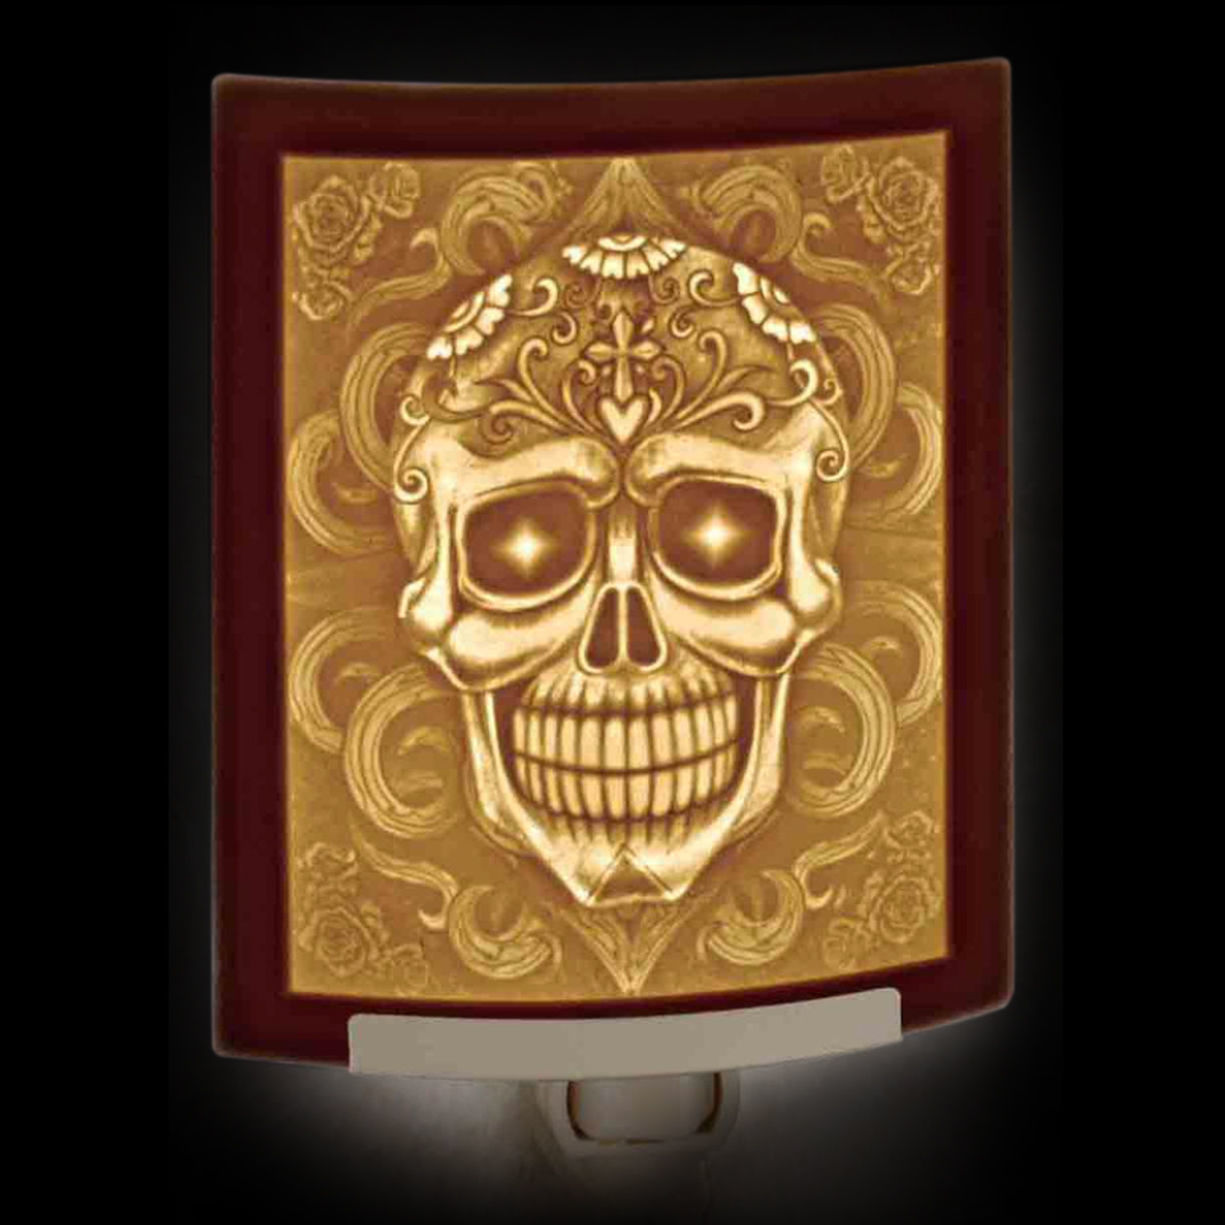 Handcrafted in USA Skull Lithophane Night Light has curved porcelain relief, on-off rocker switch, shown turned on